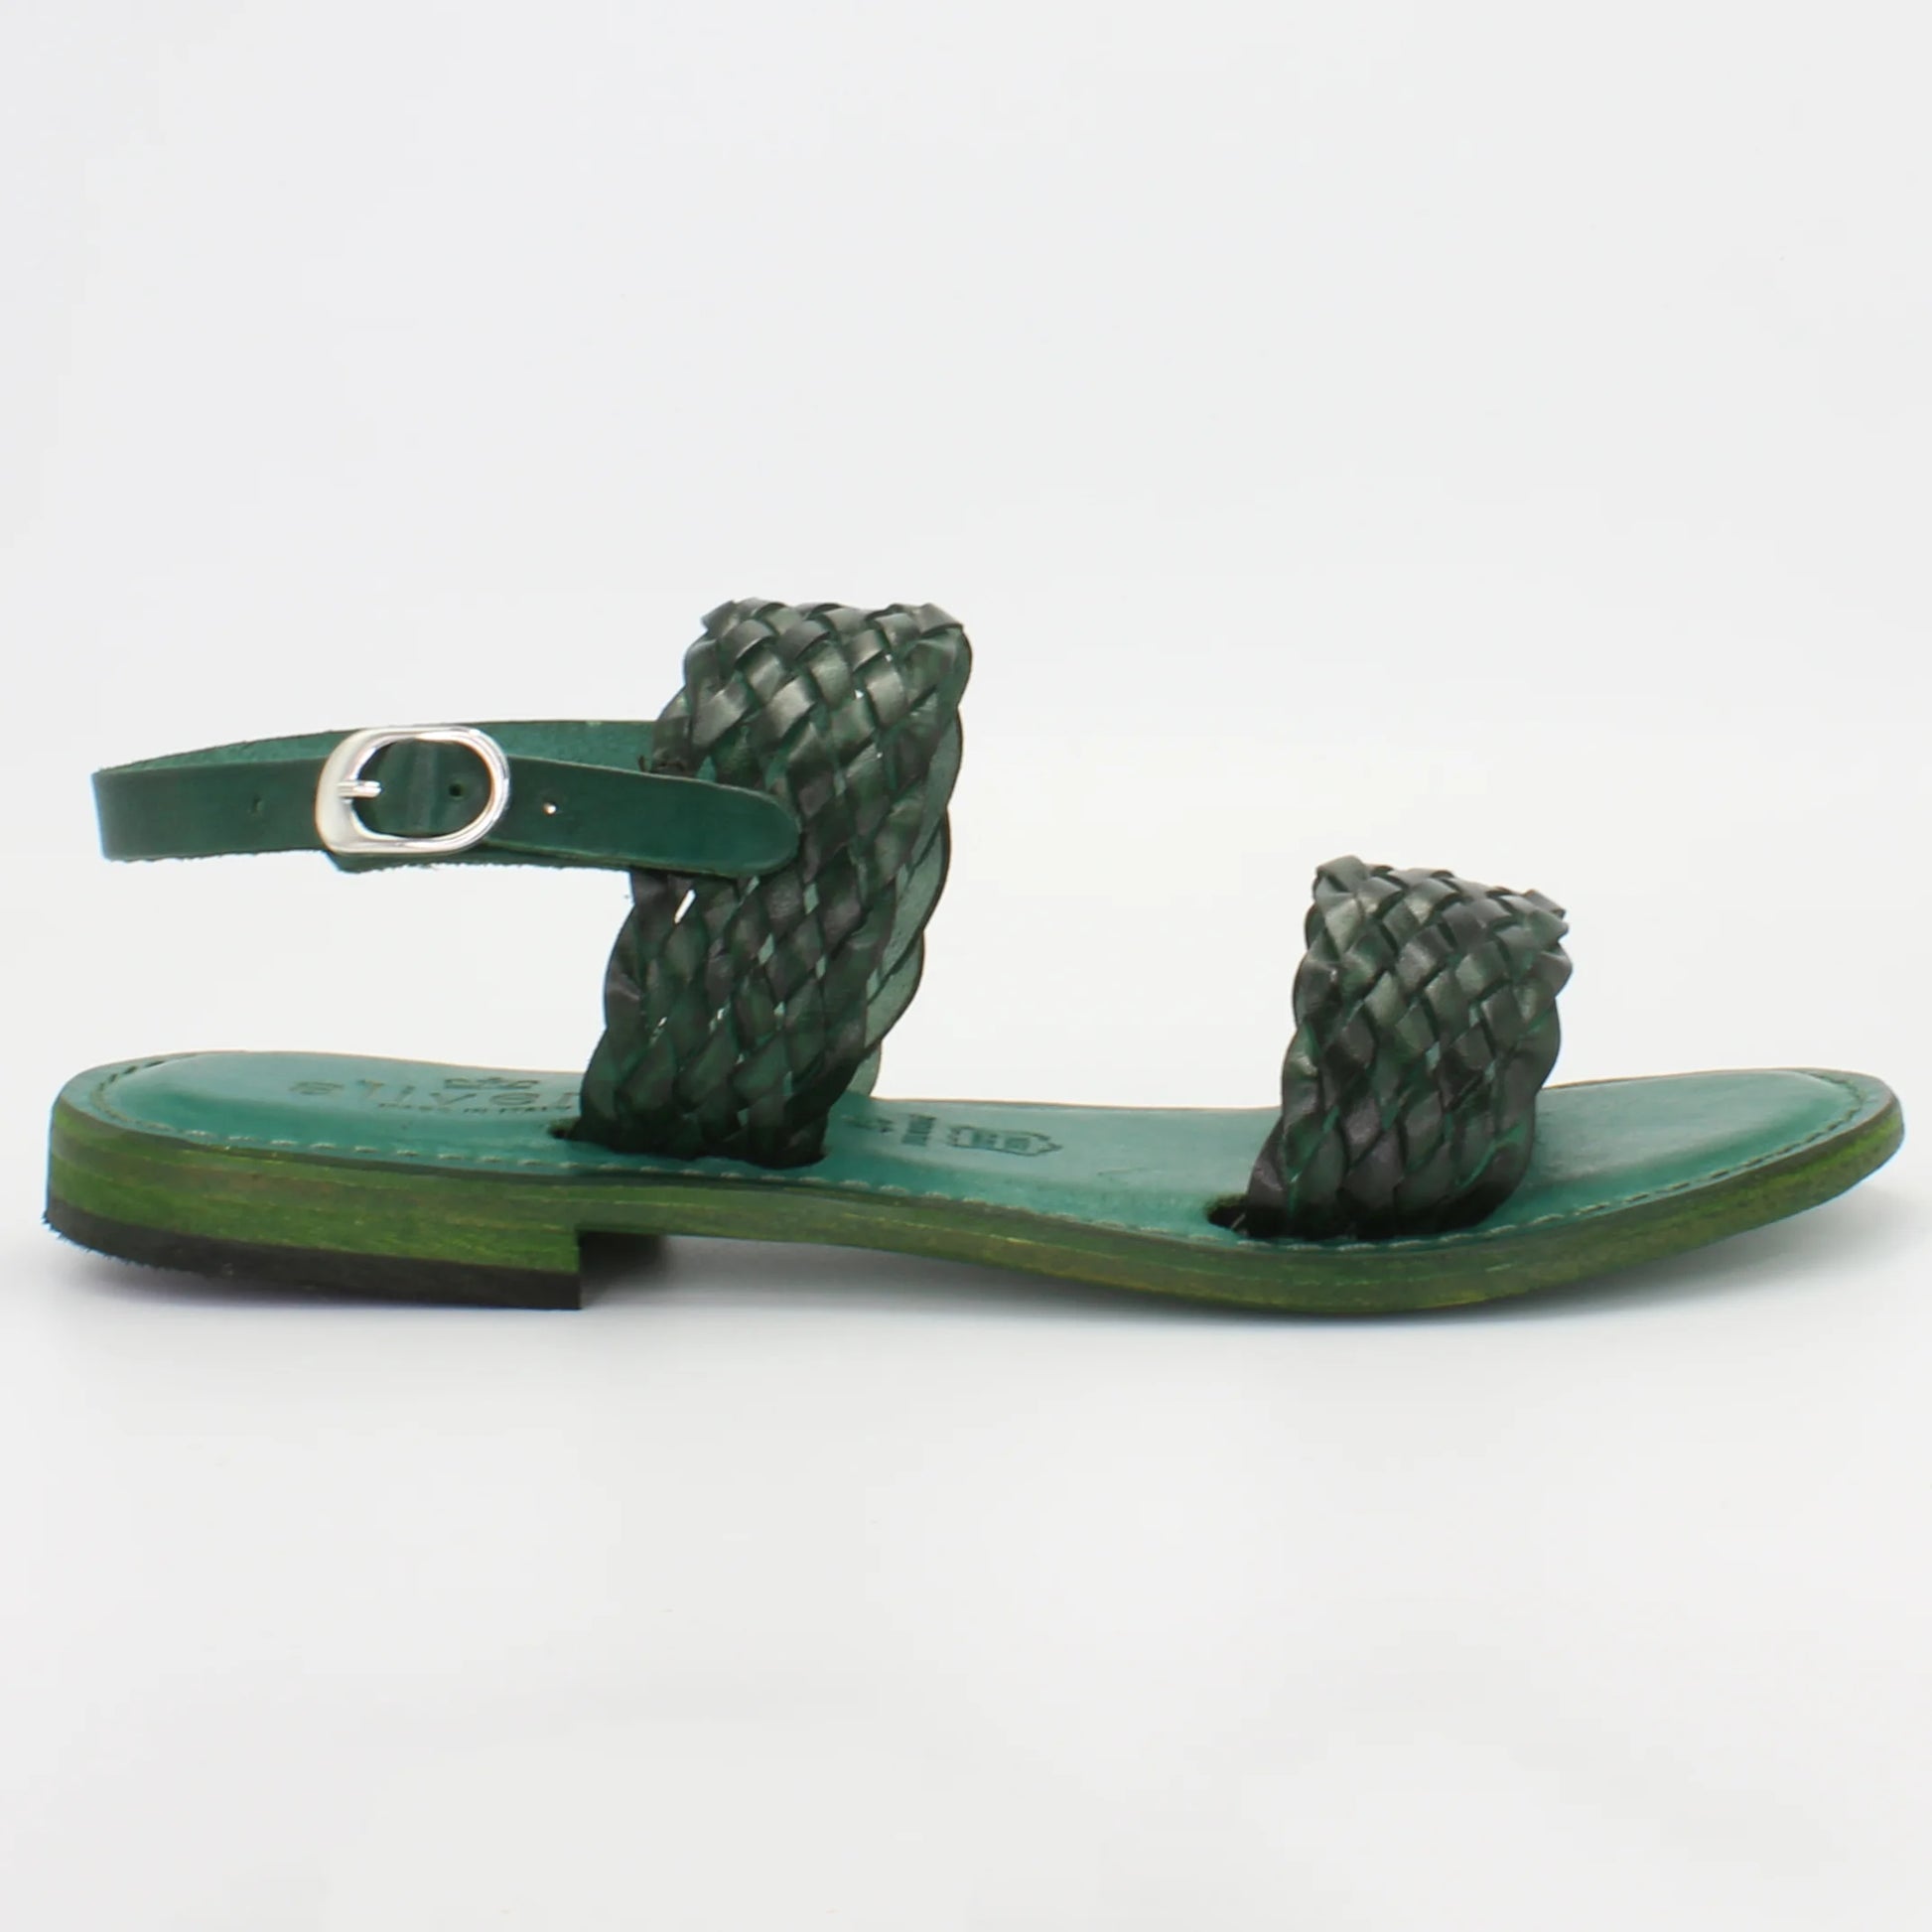 Shop Handmade Italian Leather woven sandal in verde (1040) or browse our range of hand-made Italian shoes in leather or suede in-store at Aliverti Cape Town, or shop online. We deliver in South Africa & offer multiple payment plans as well as accept multiple safe & secure payment methods.